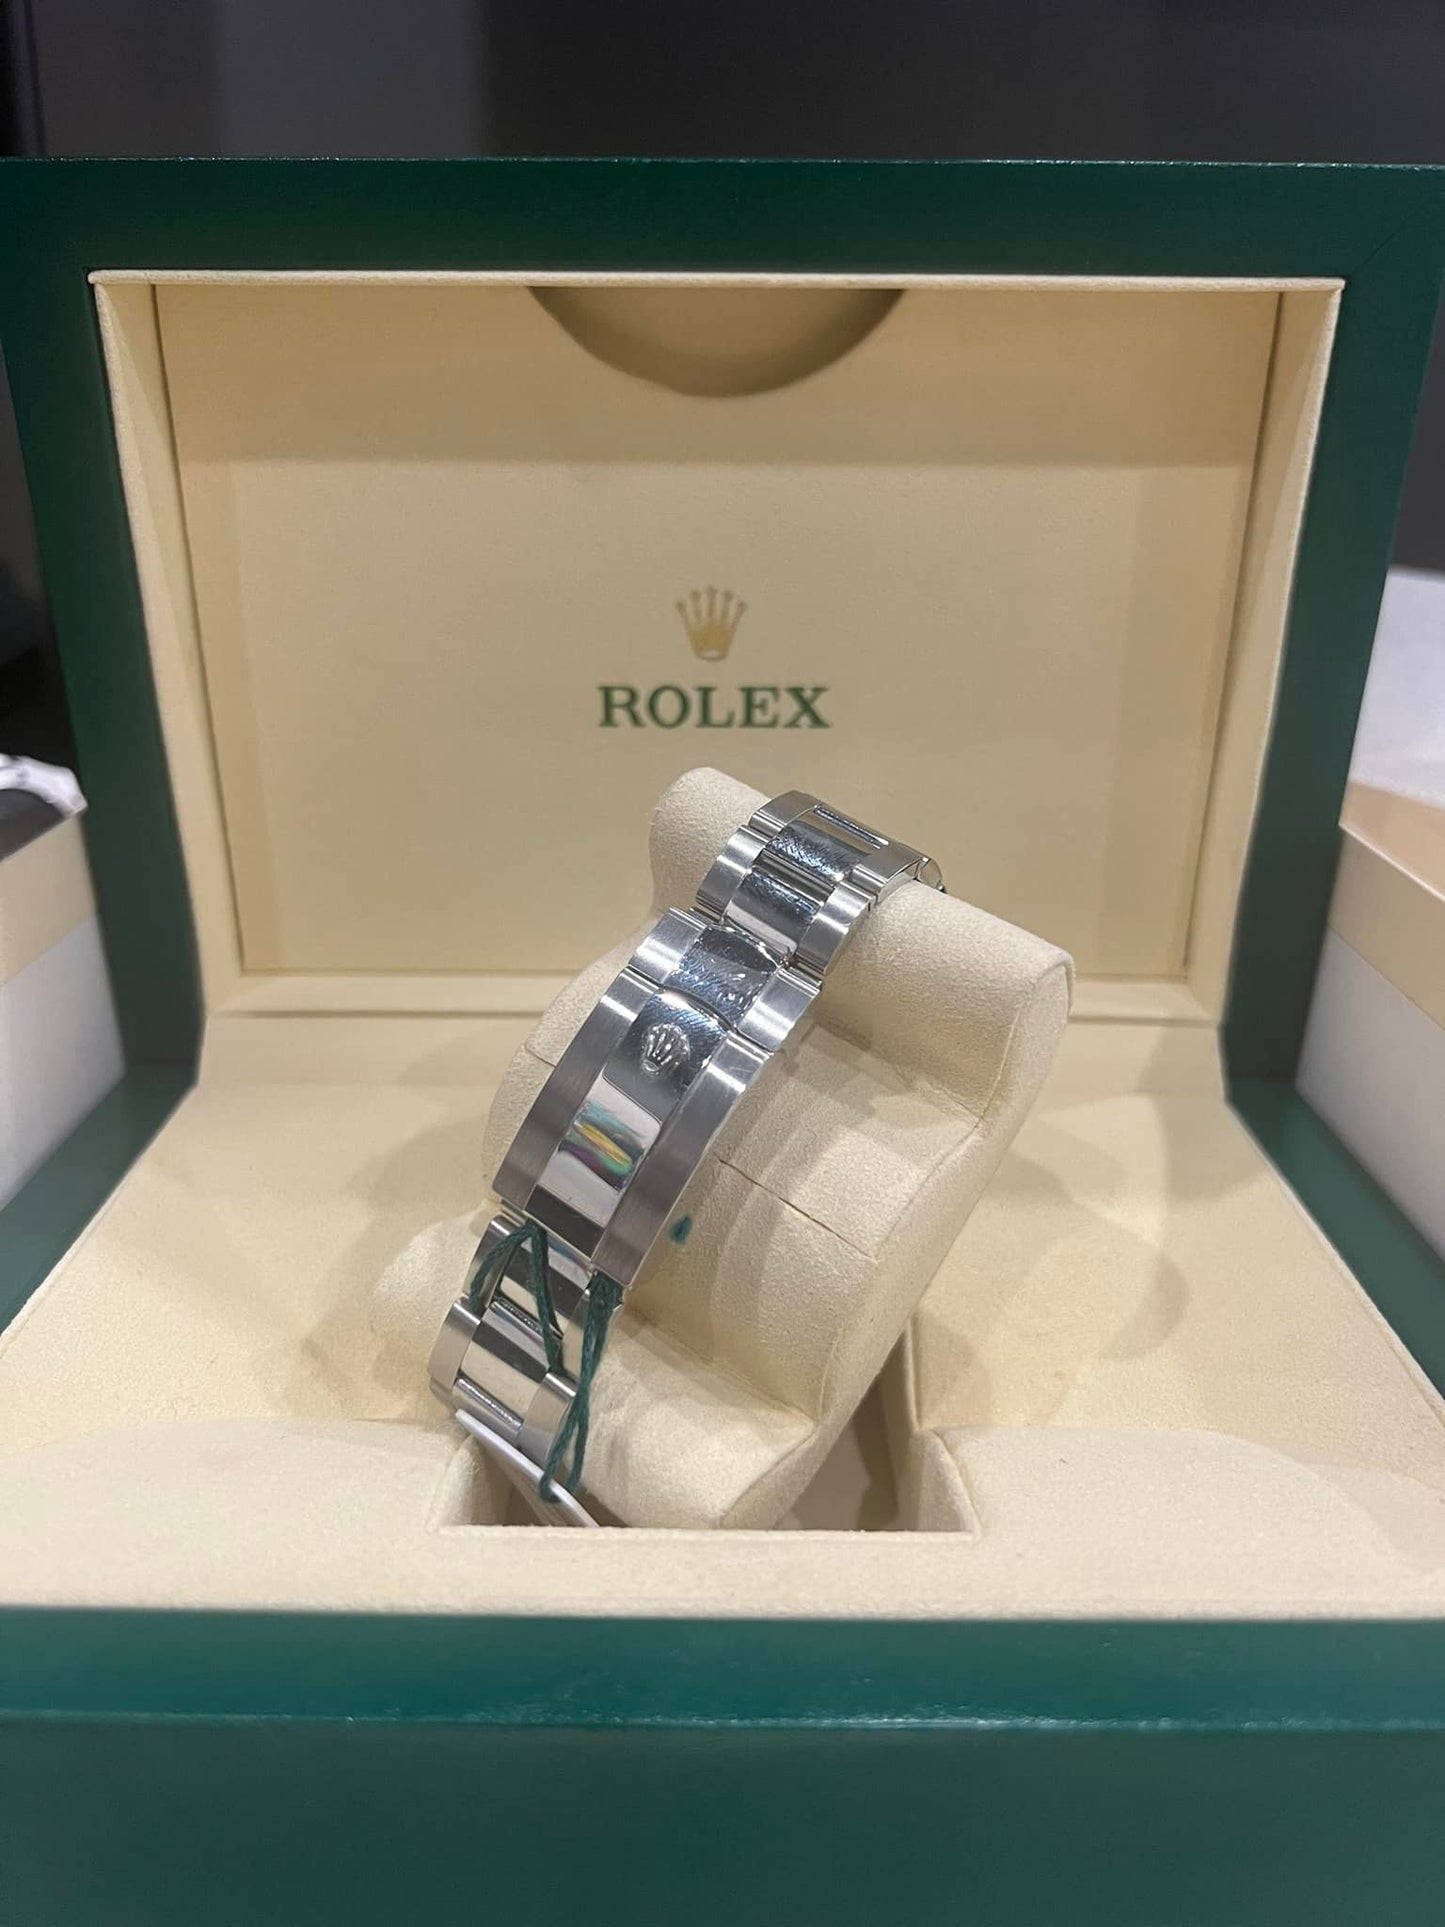 ROLEX STEEL SKY-DWELLER 32693 42MM WHIITE DIAL Box +Papers